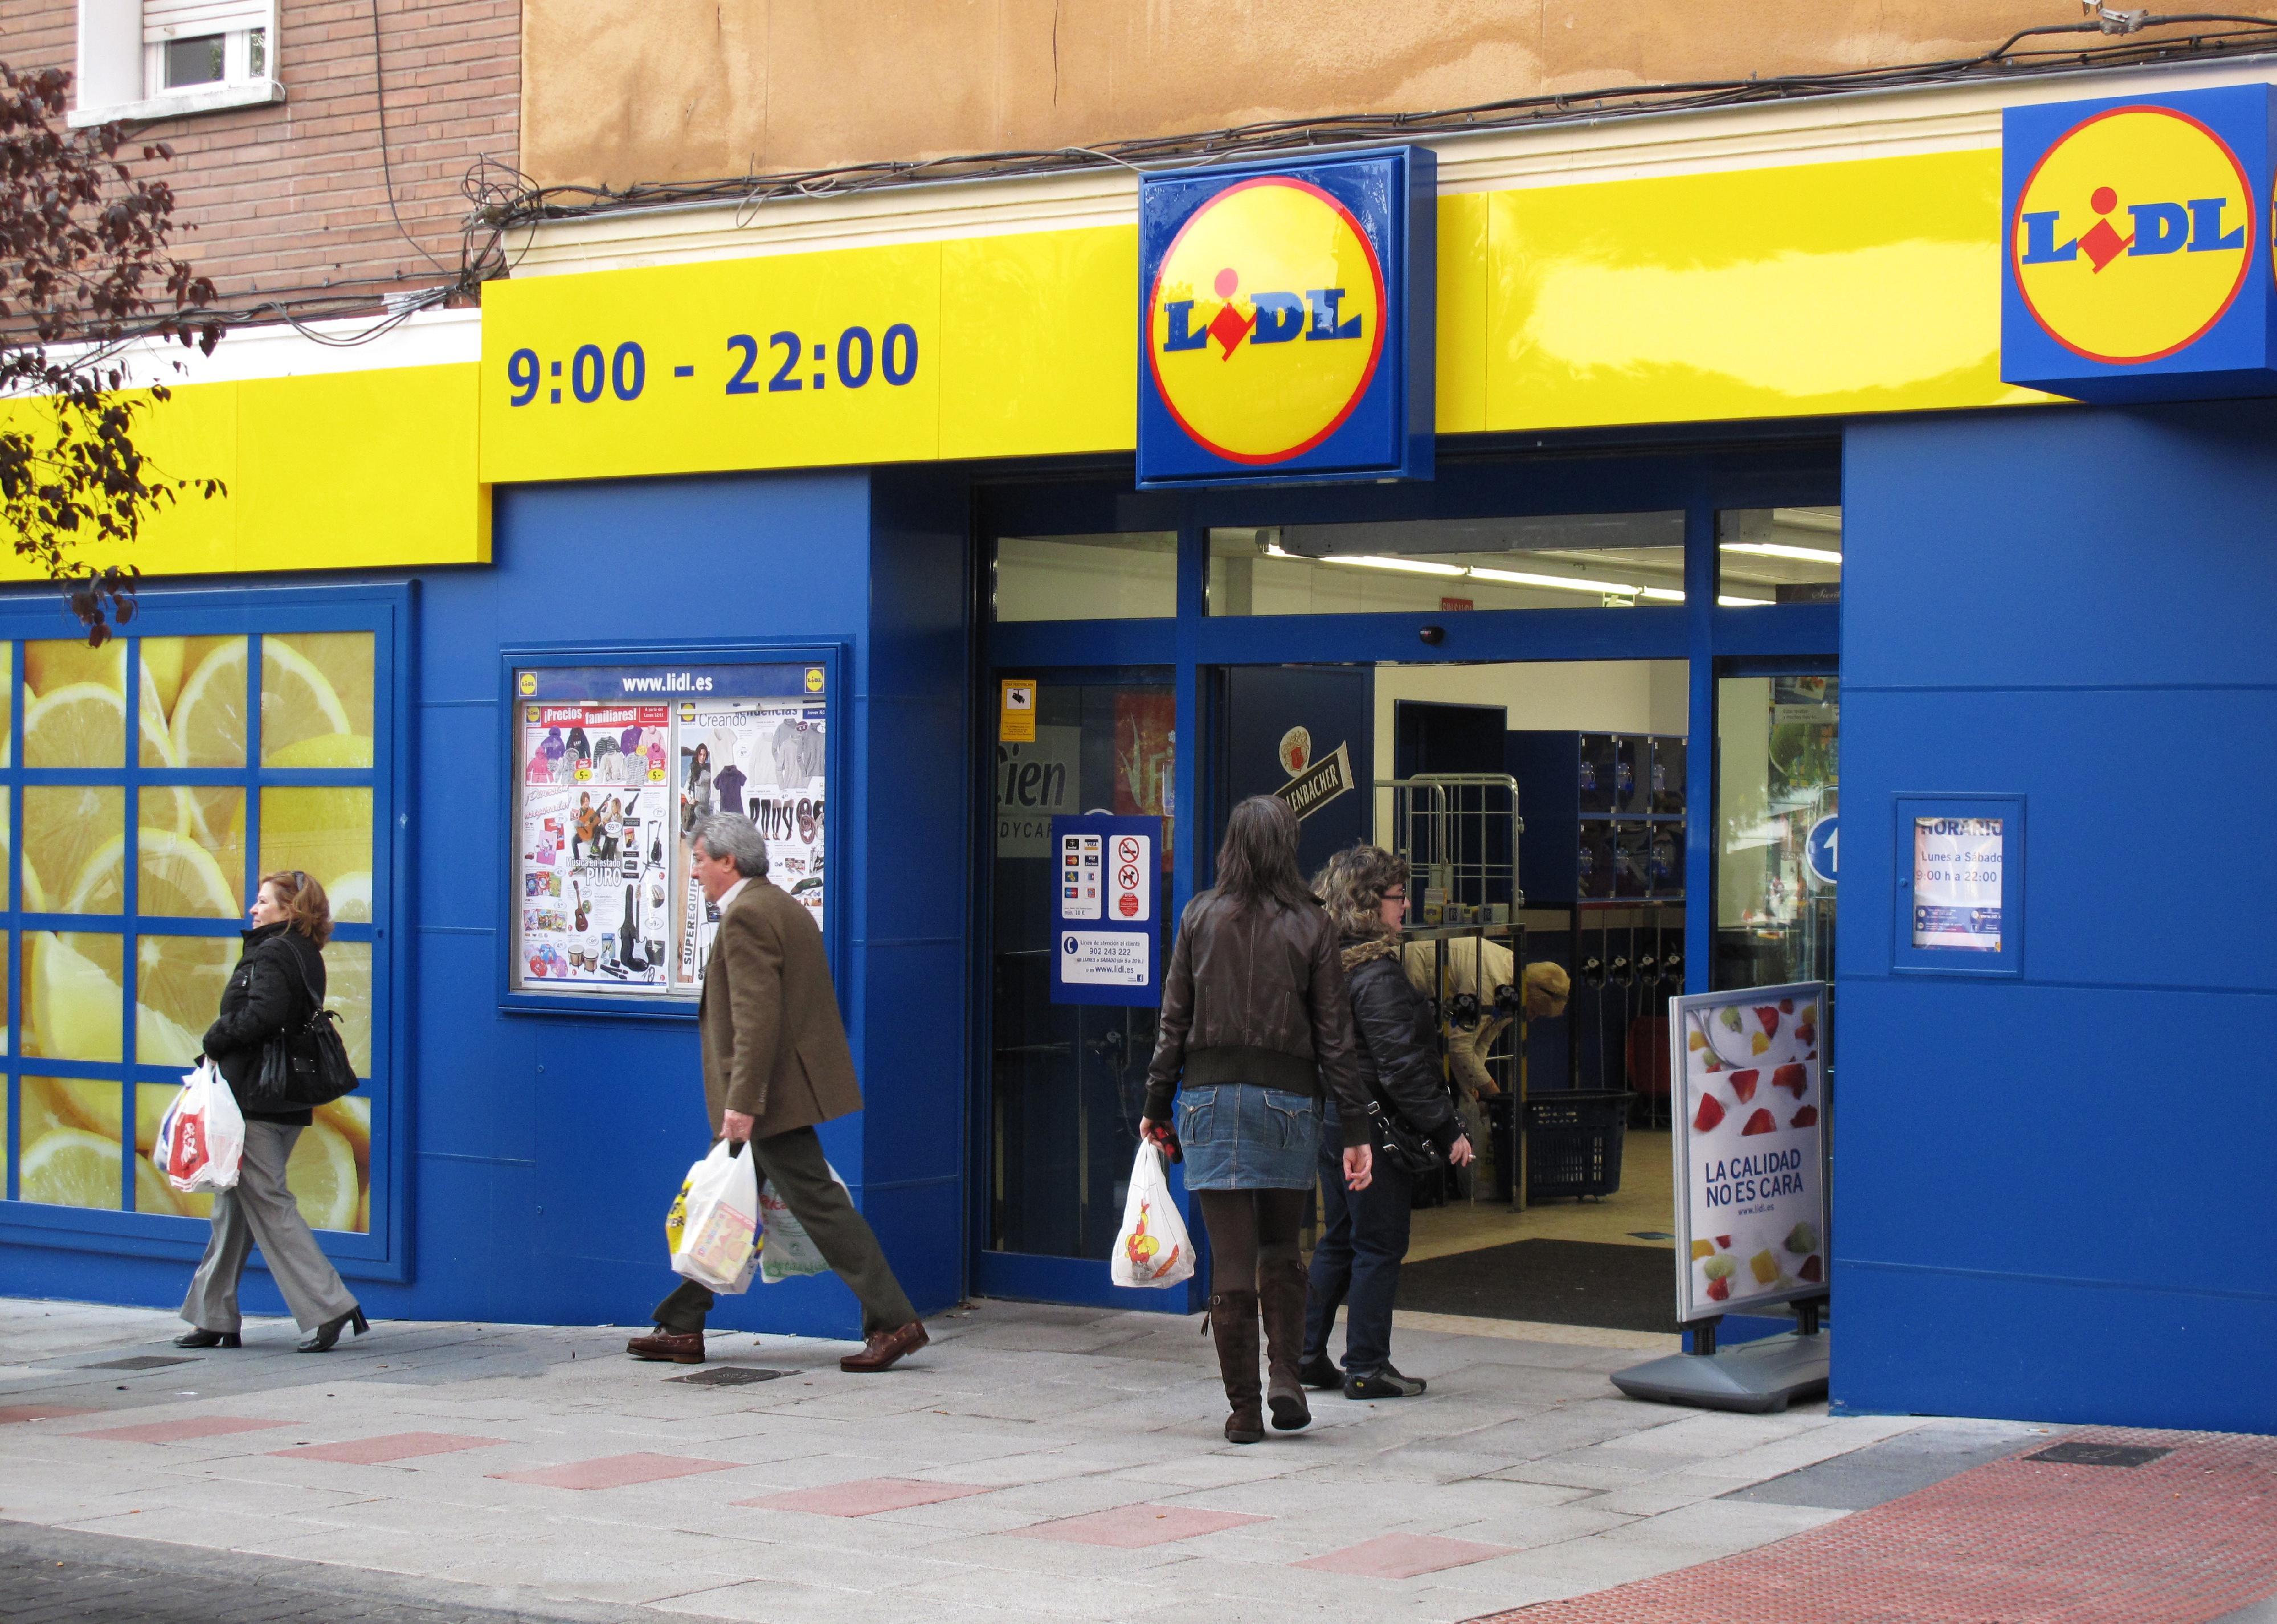 Exterior of Lidl store.